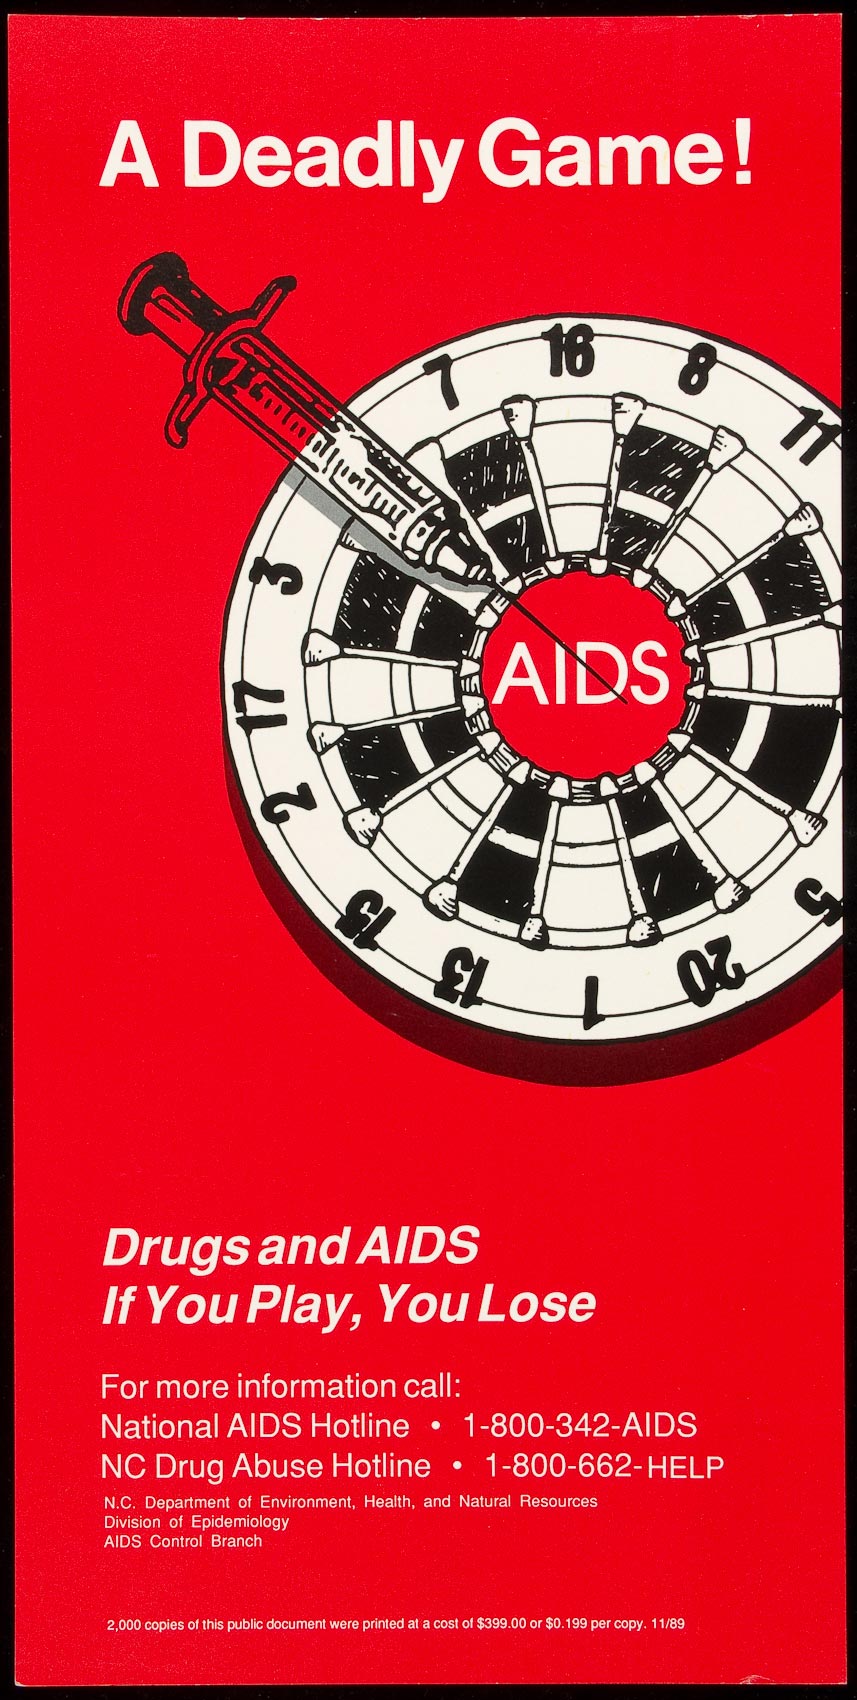 AIDS poster shows dart board with text A DEADLY GAME